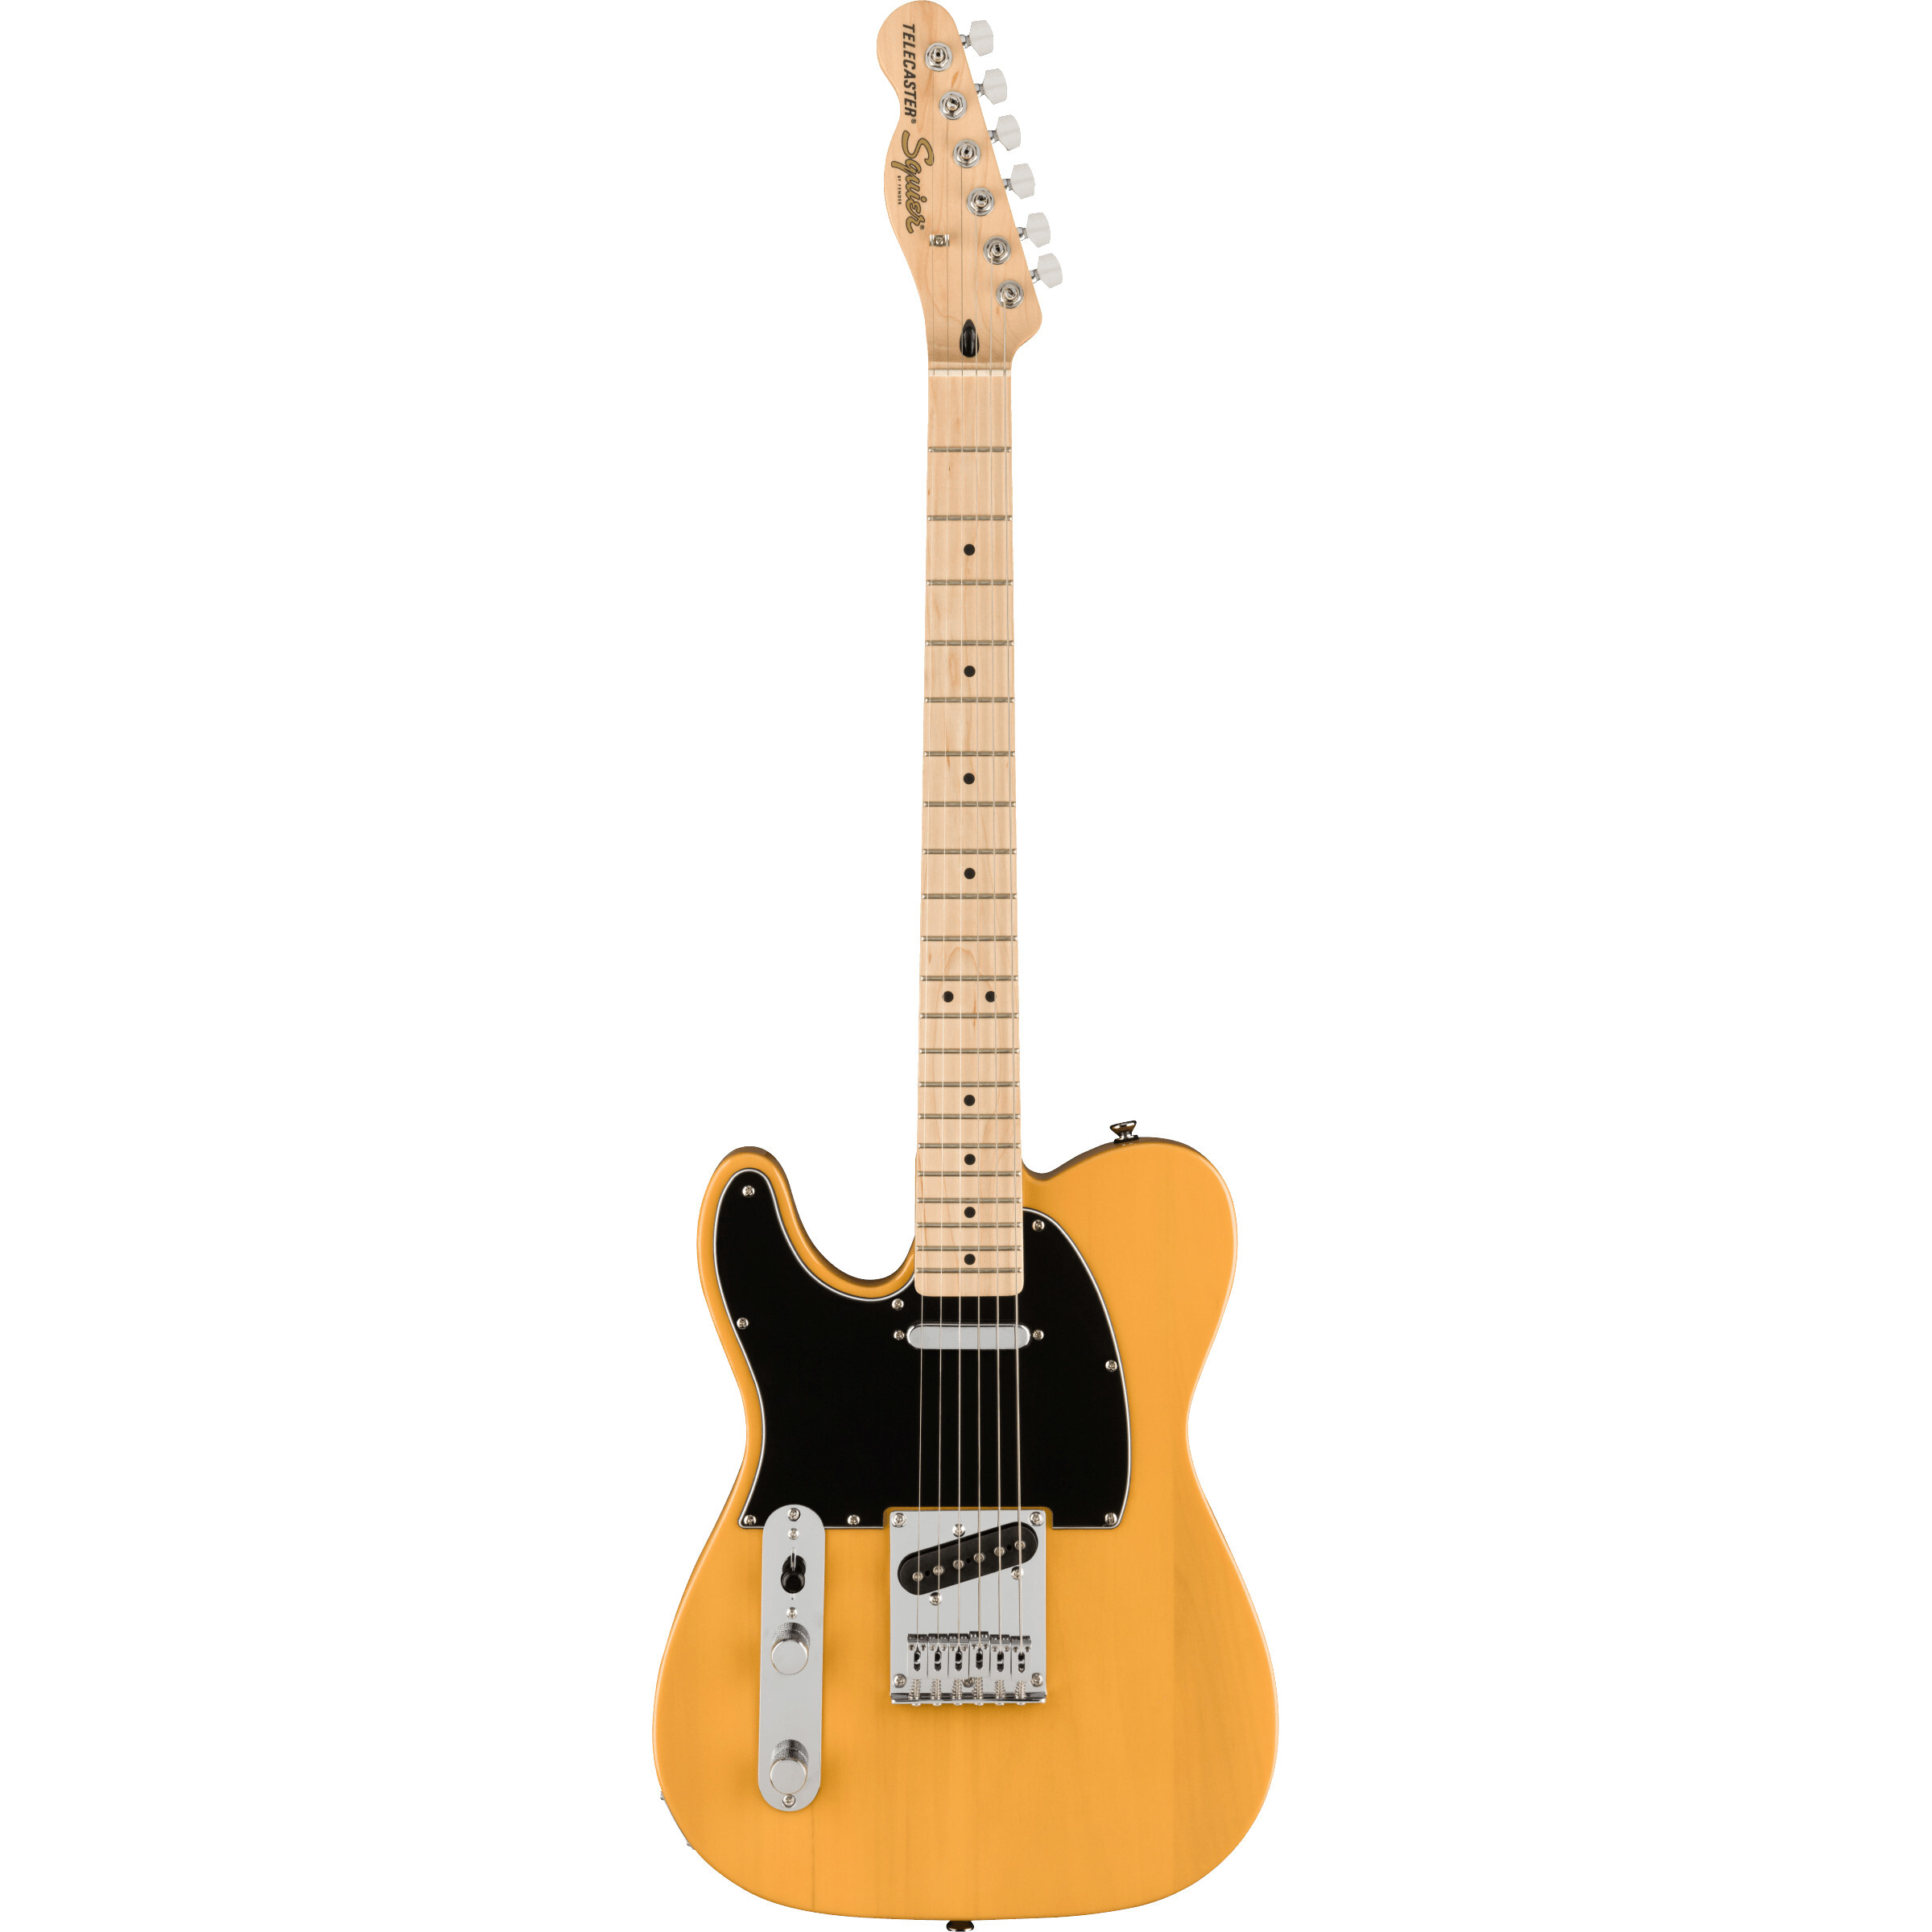 Squier Affinity Series Telecaster LH Butterscotch Blonde MN